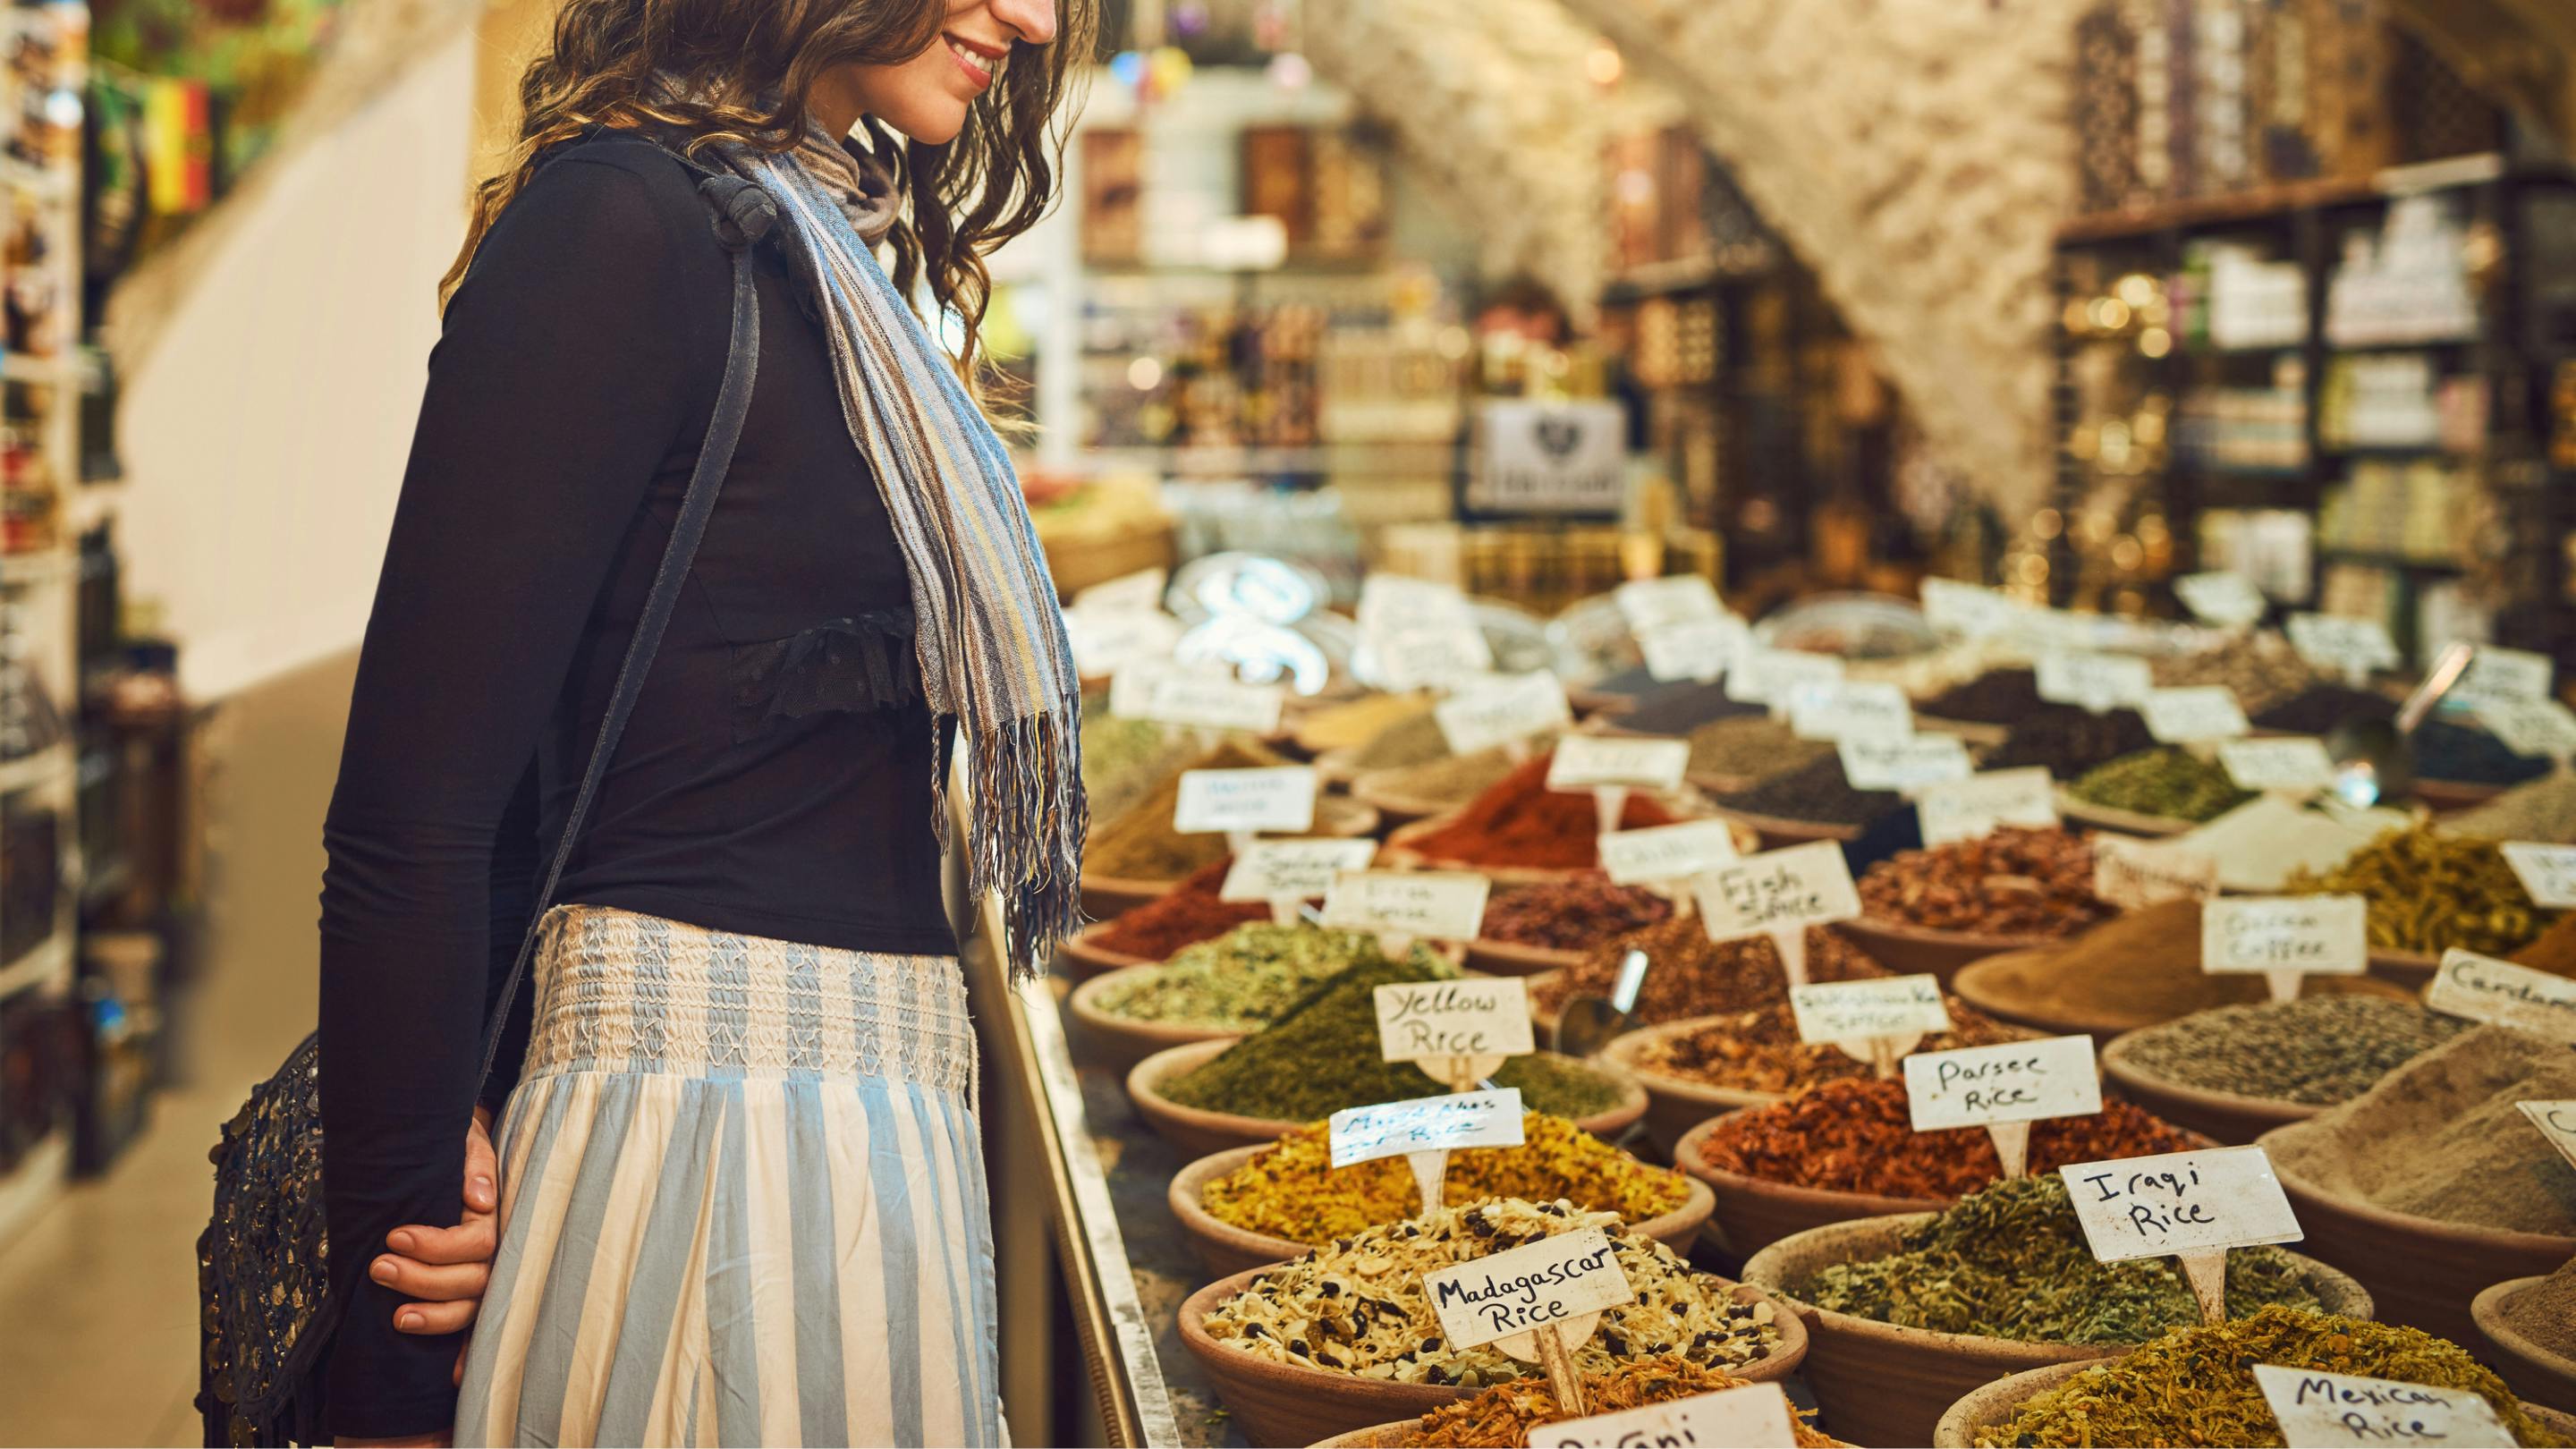 Woman looking at spices